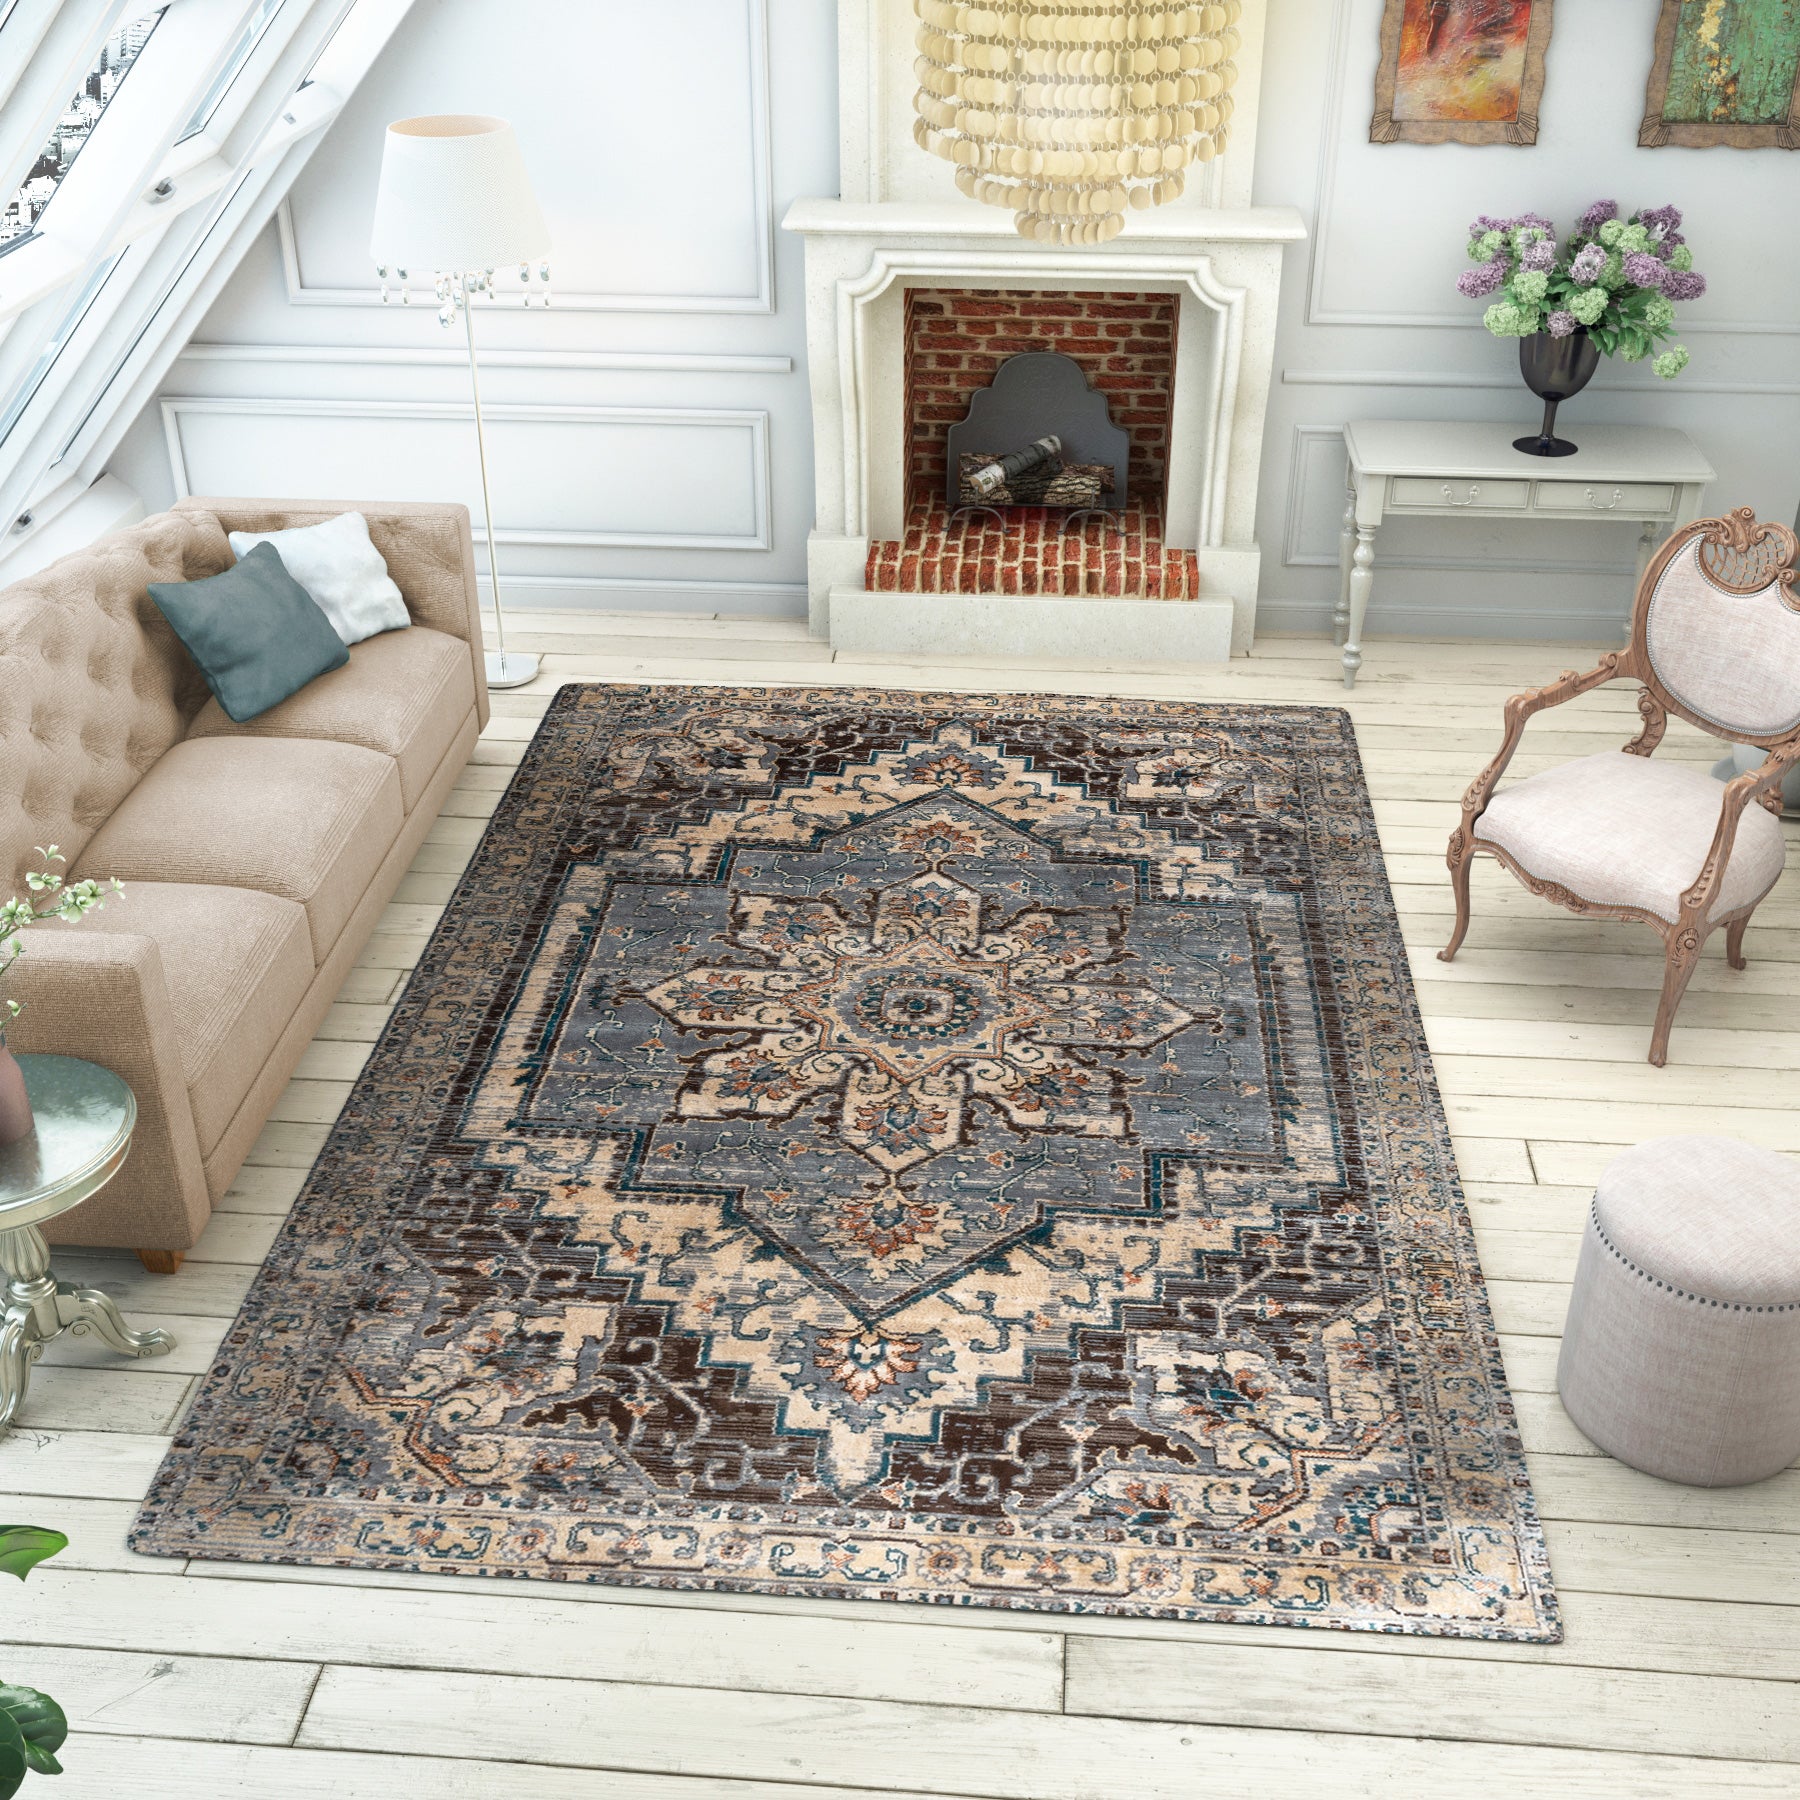 6 Reasons Why Transitional Rugs are So Popular